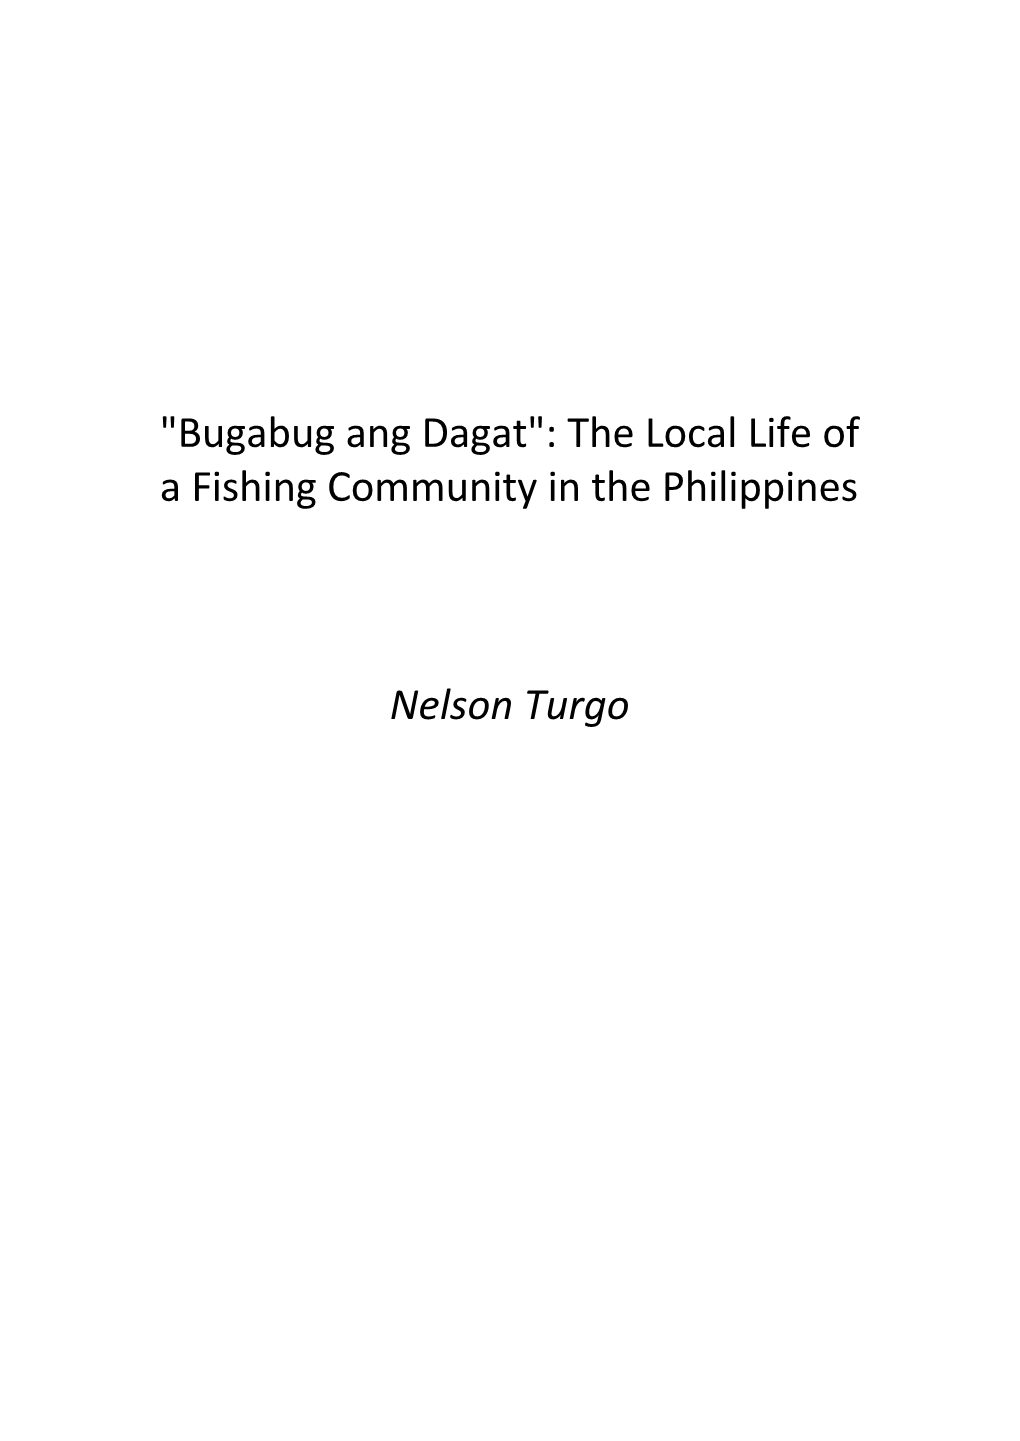 "Bugabug Ang Dagat": the Local Life of a Fishing Community in the Philippines Nelson Turgo